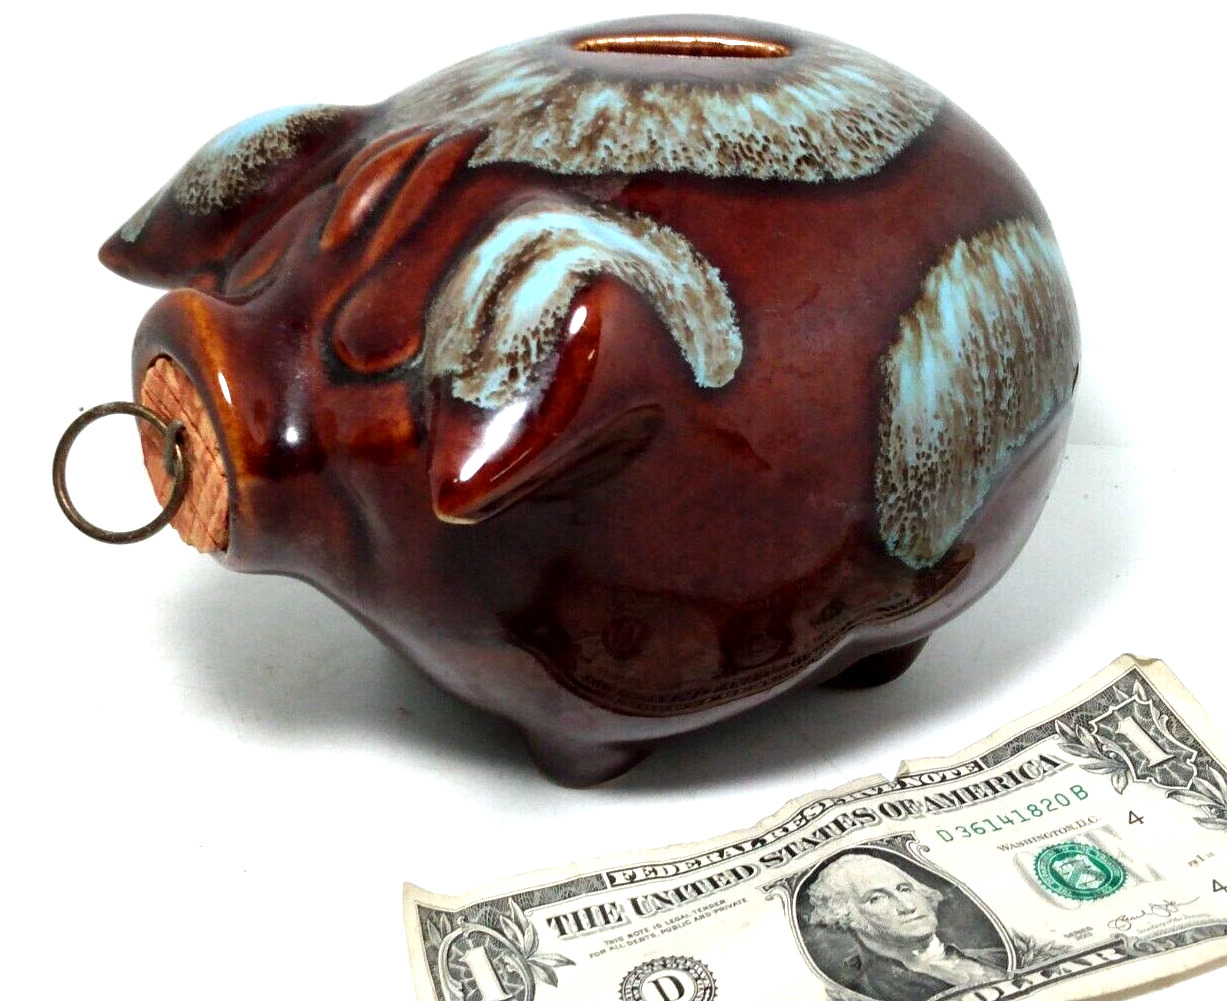 1957 Corky Pig by Hull Pottery Piggy Bank - Red Cork - Small chip under Ear